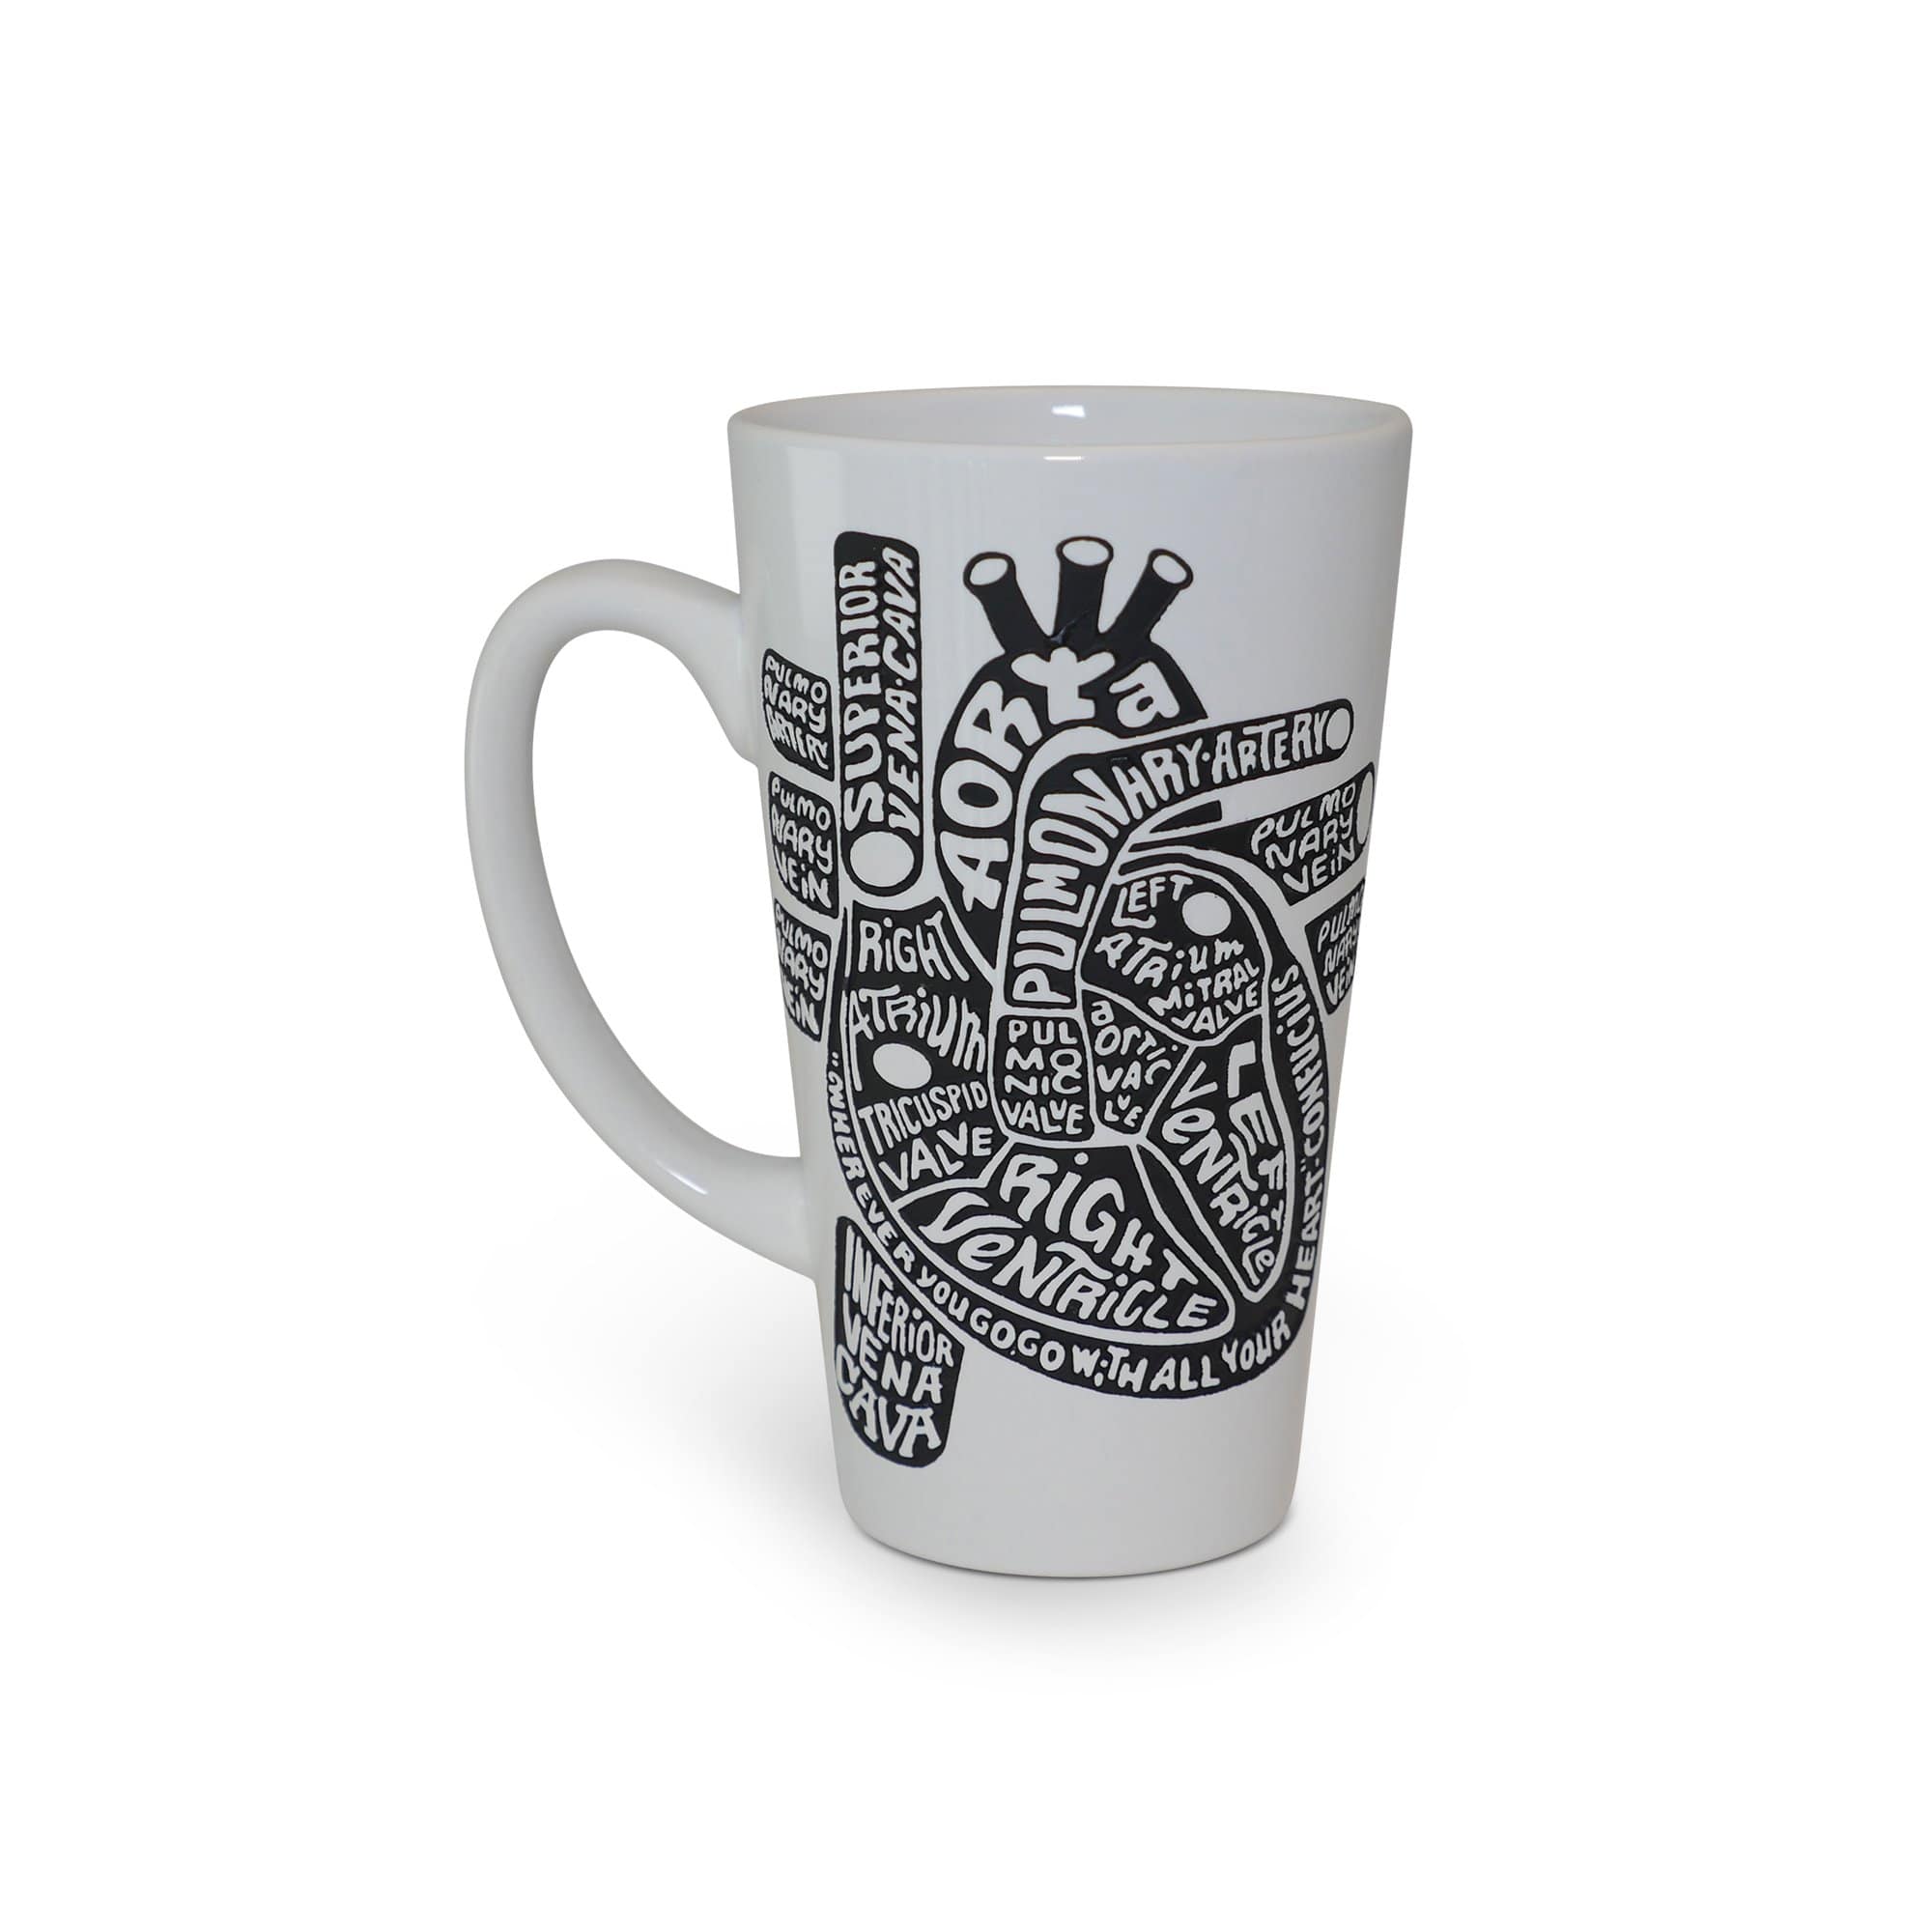 https://cdn.shopify.com/s/files/1/1813/3837/products/limited-edition-porcelain-etched-heart-typography-mug-white-28159879774266_2000x.jpg?v=1627981115